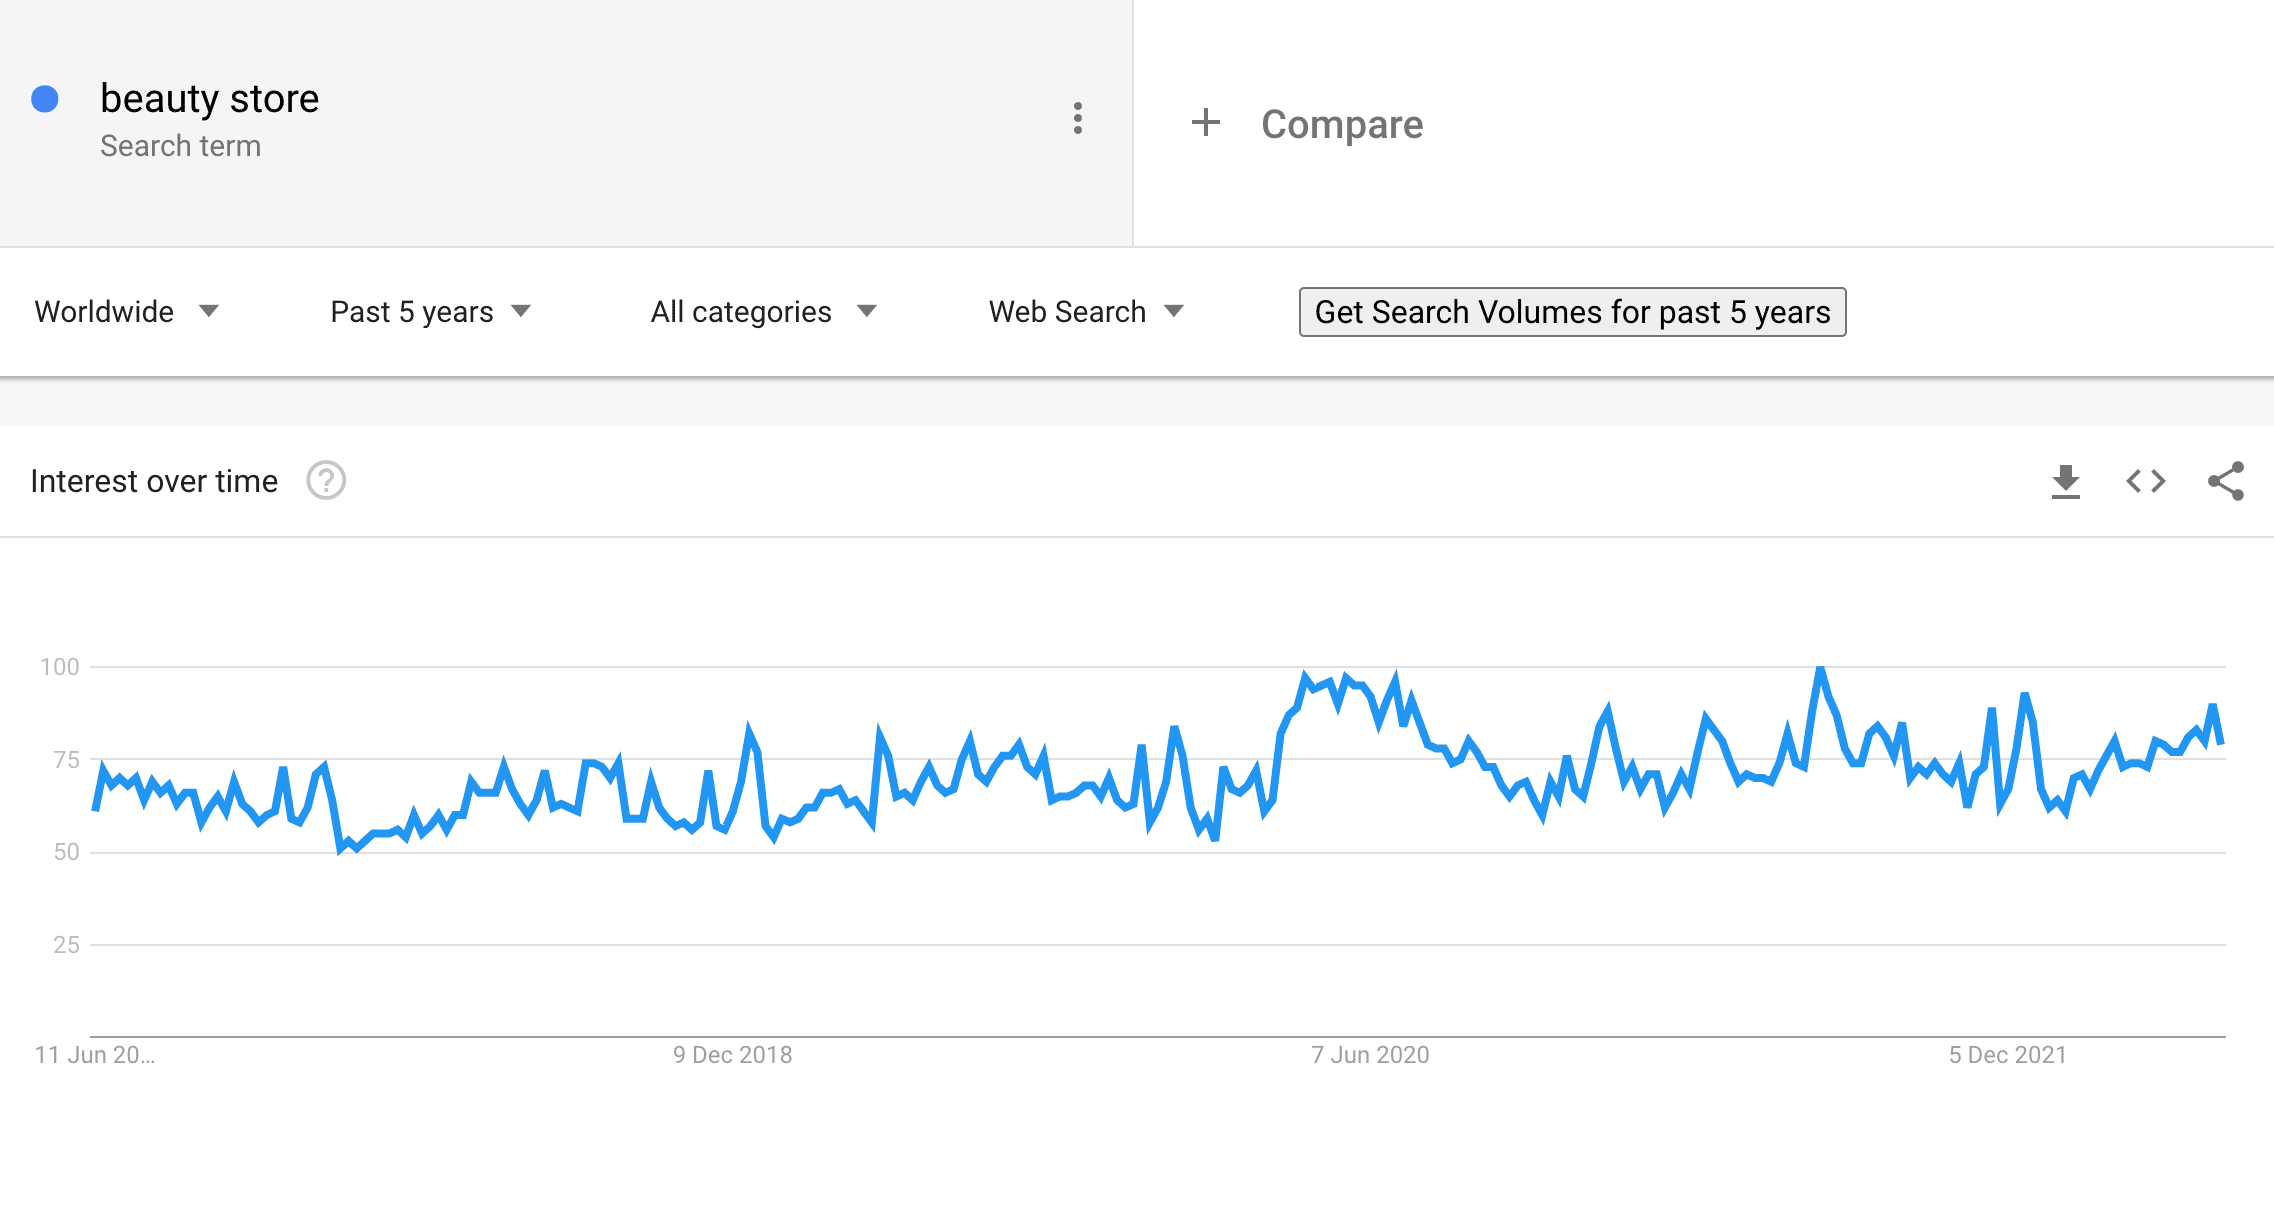 Beauty store according to Google Trends